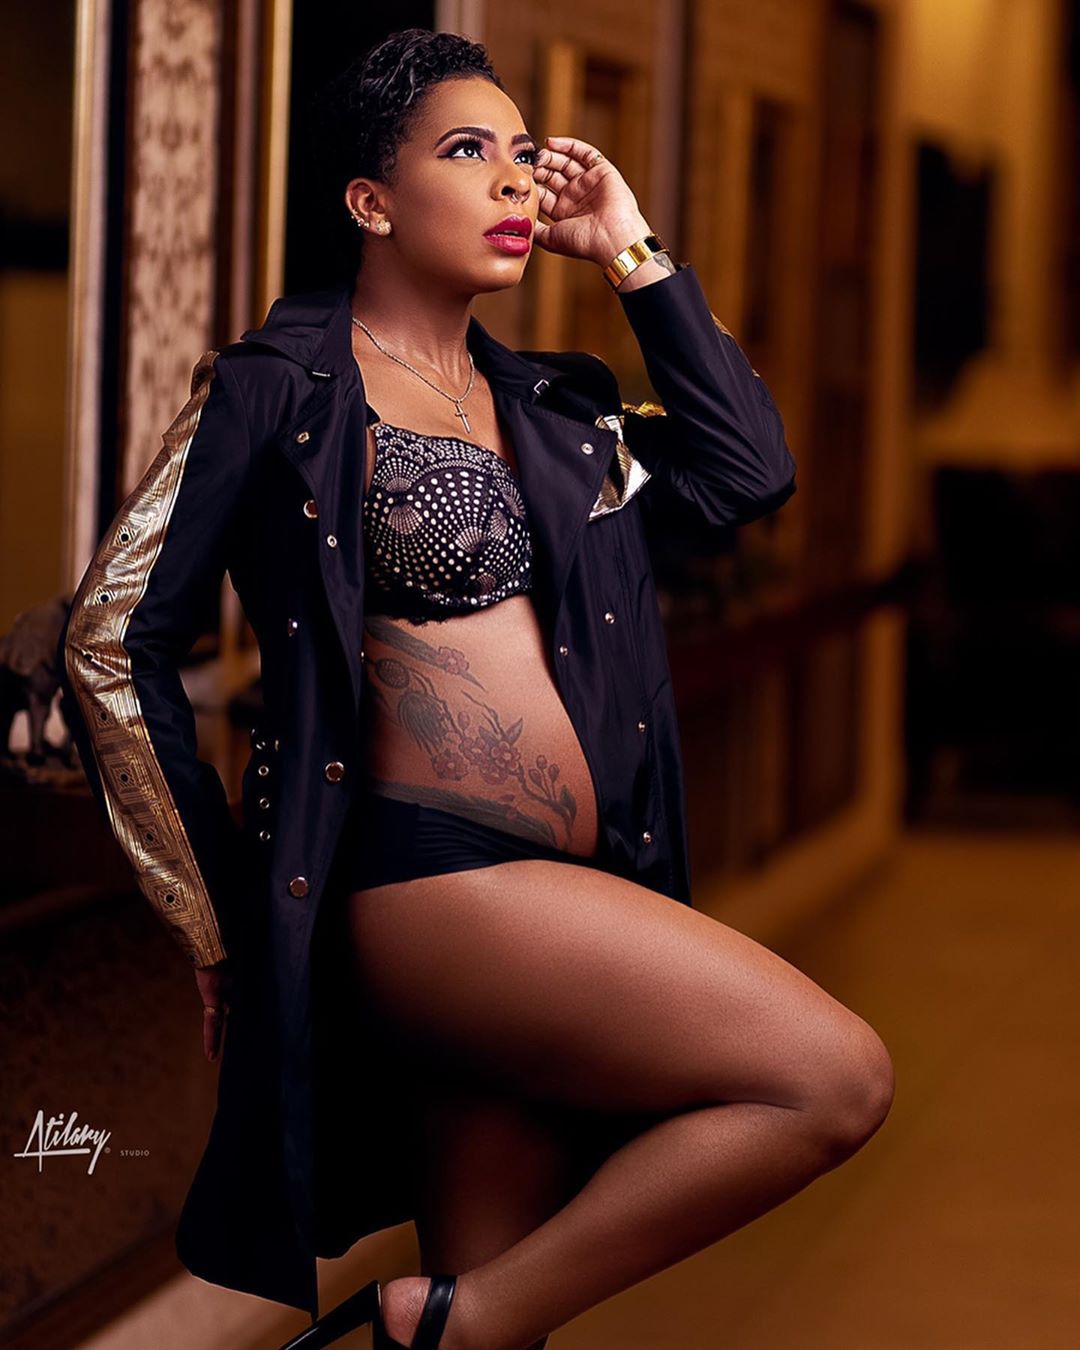 TBoss rocks her Baby Bump like a Boss in this Shoot & We Love It!